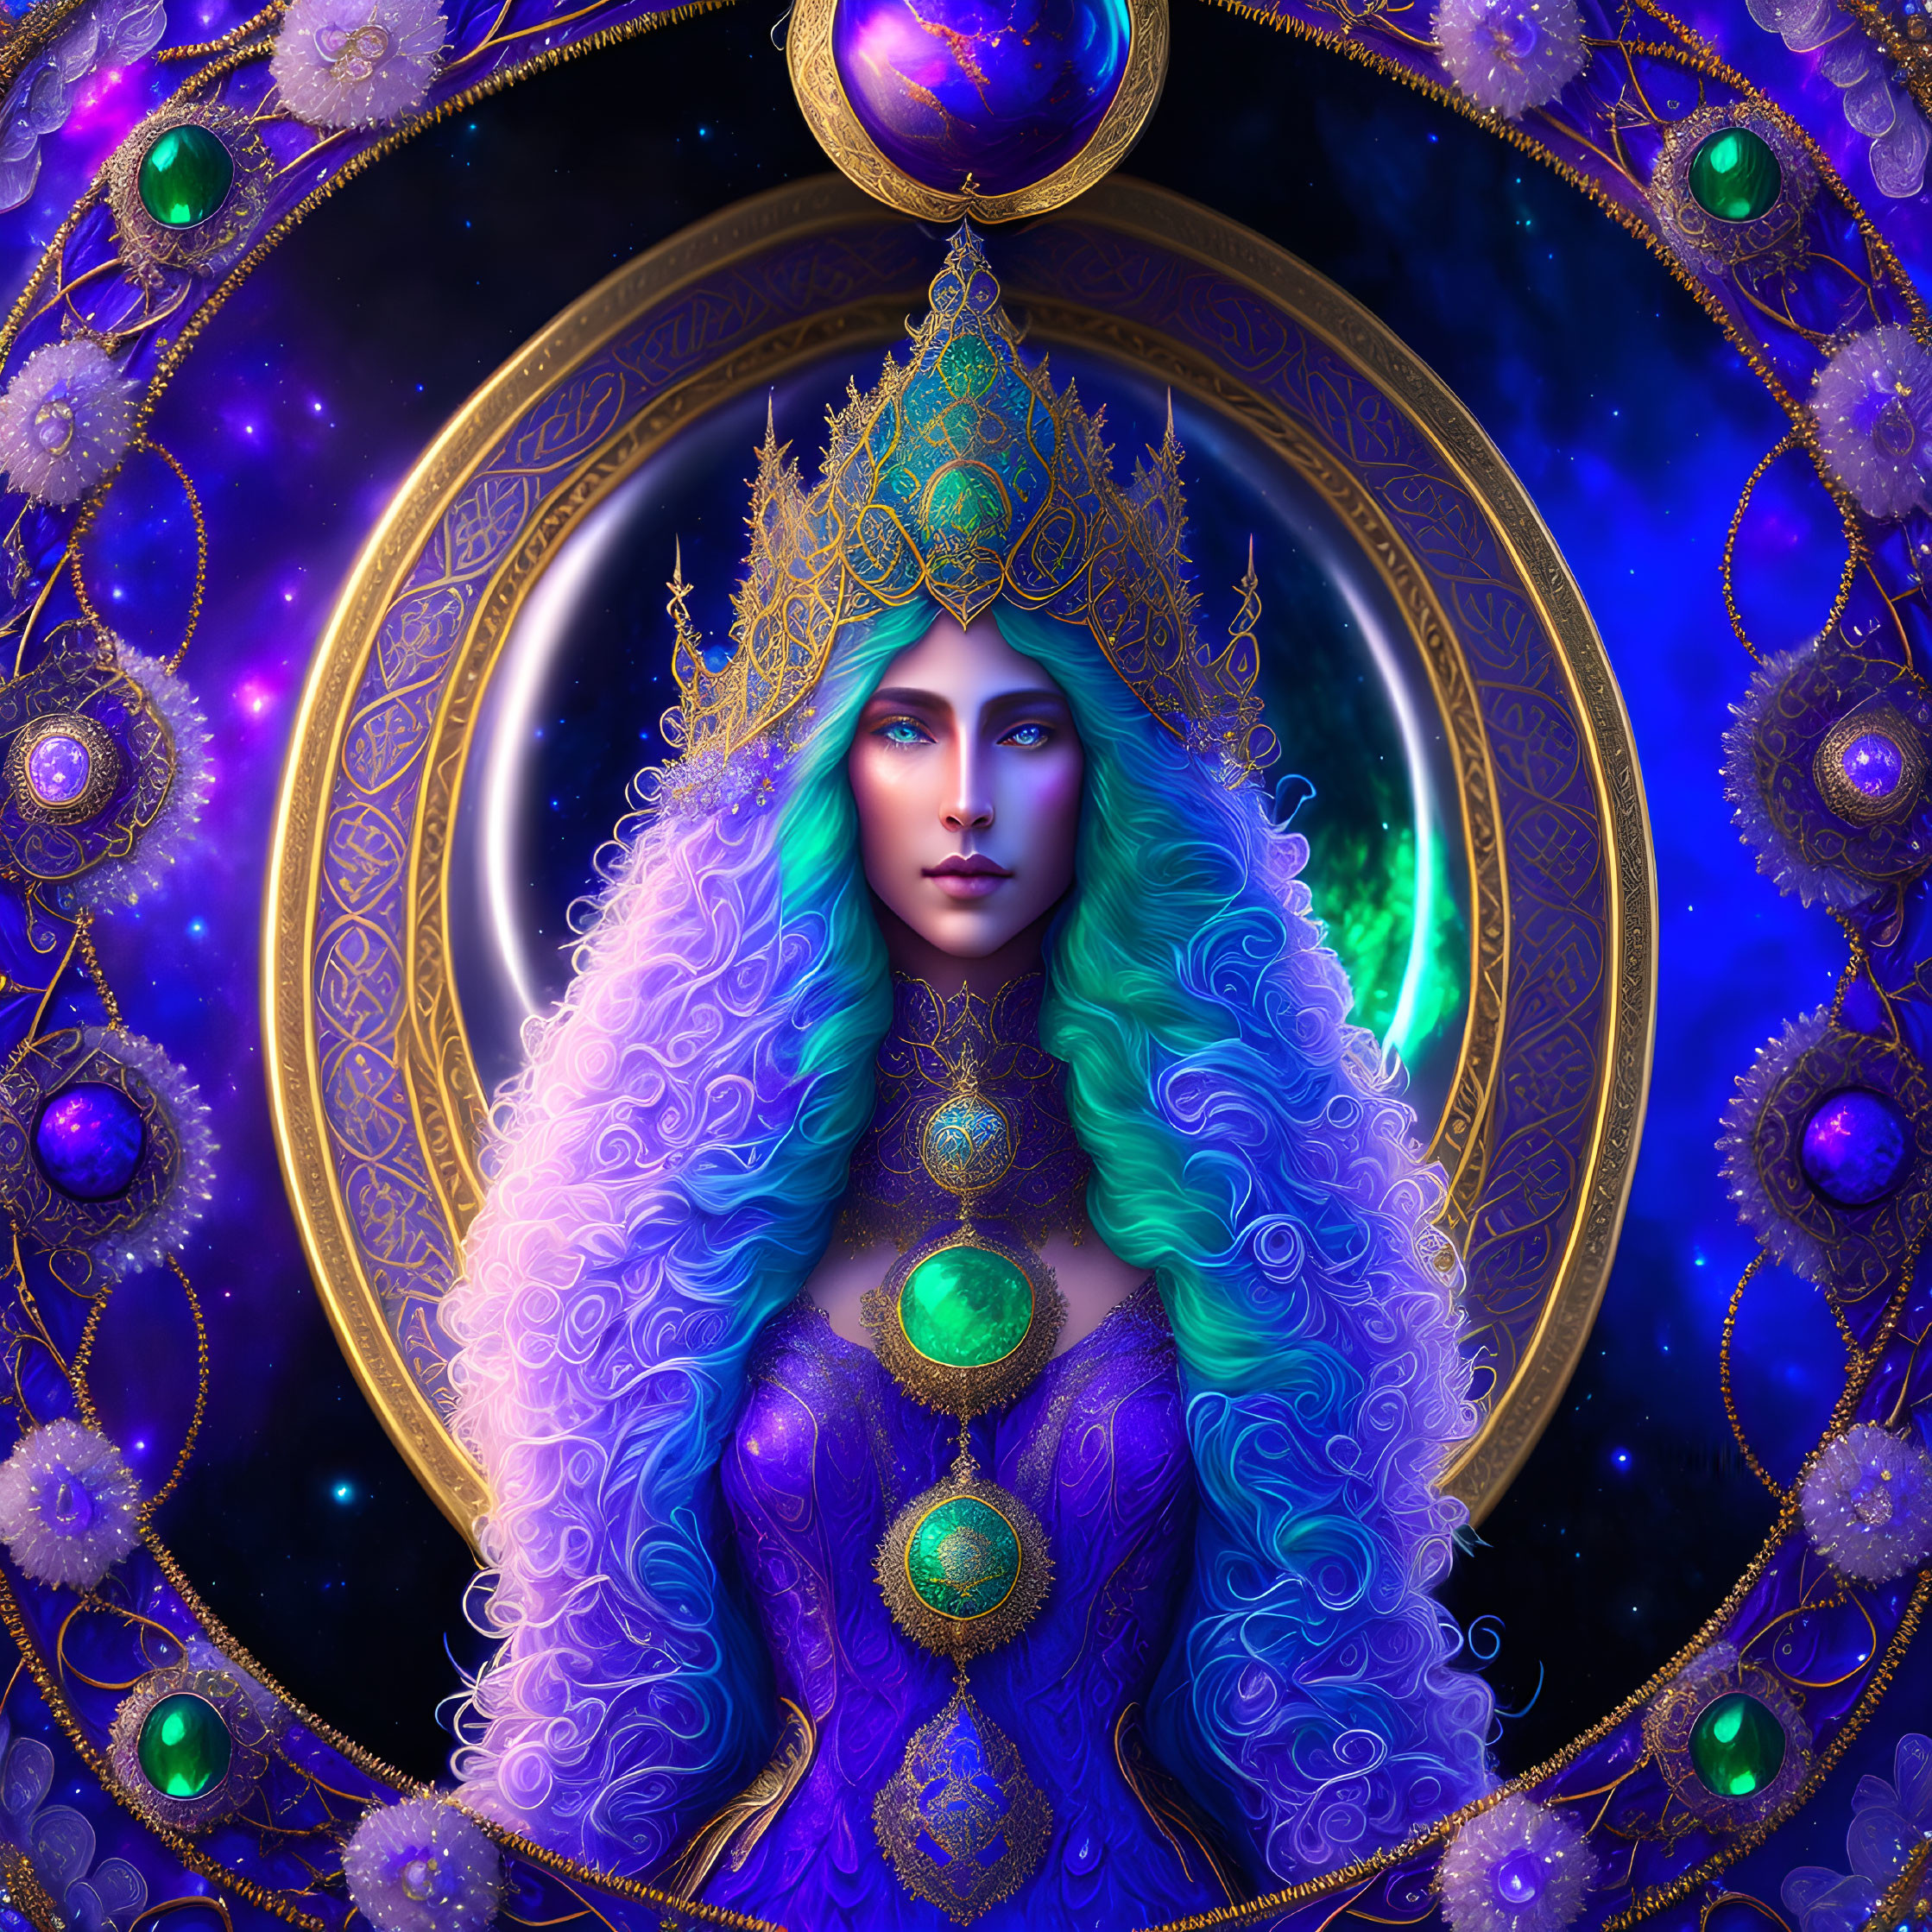 Regal figure with blue and purple hair in cosmic setting